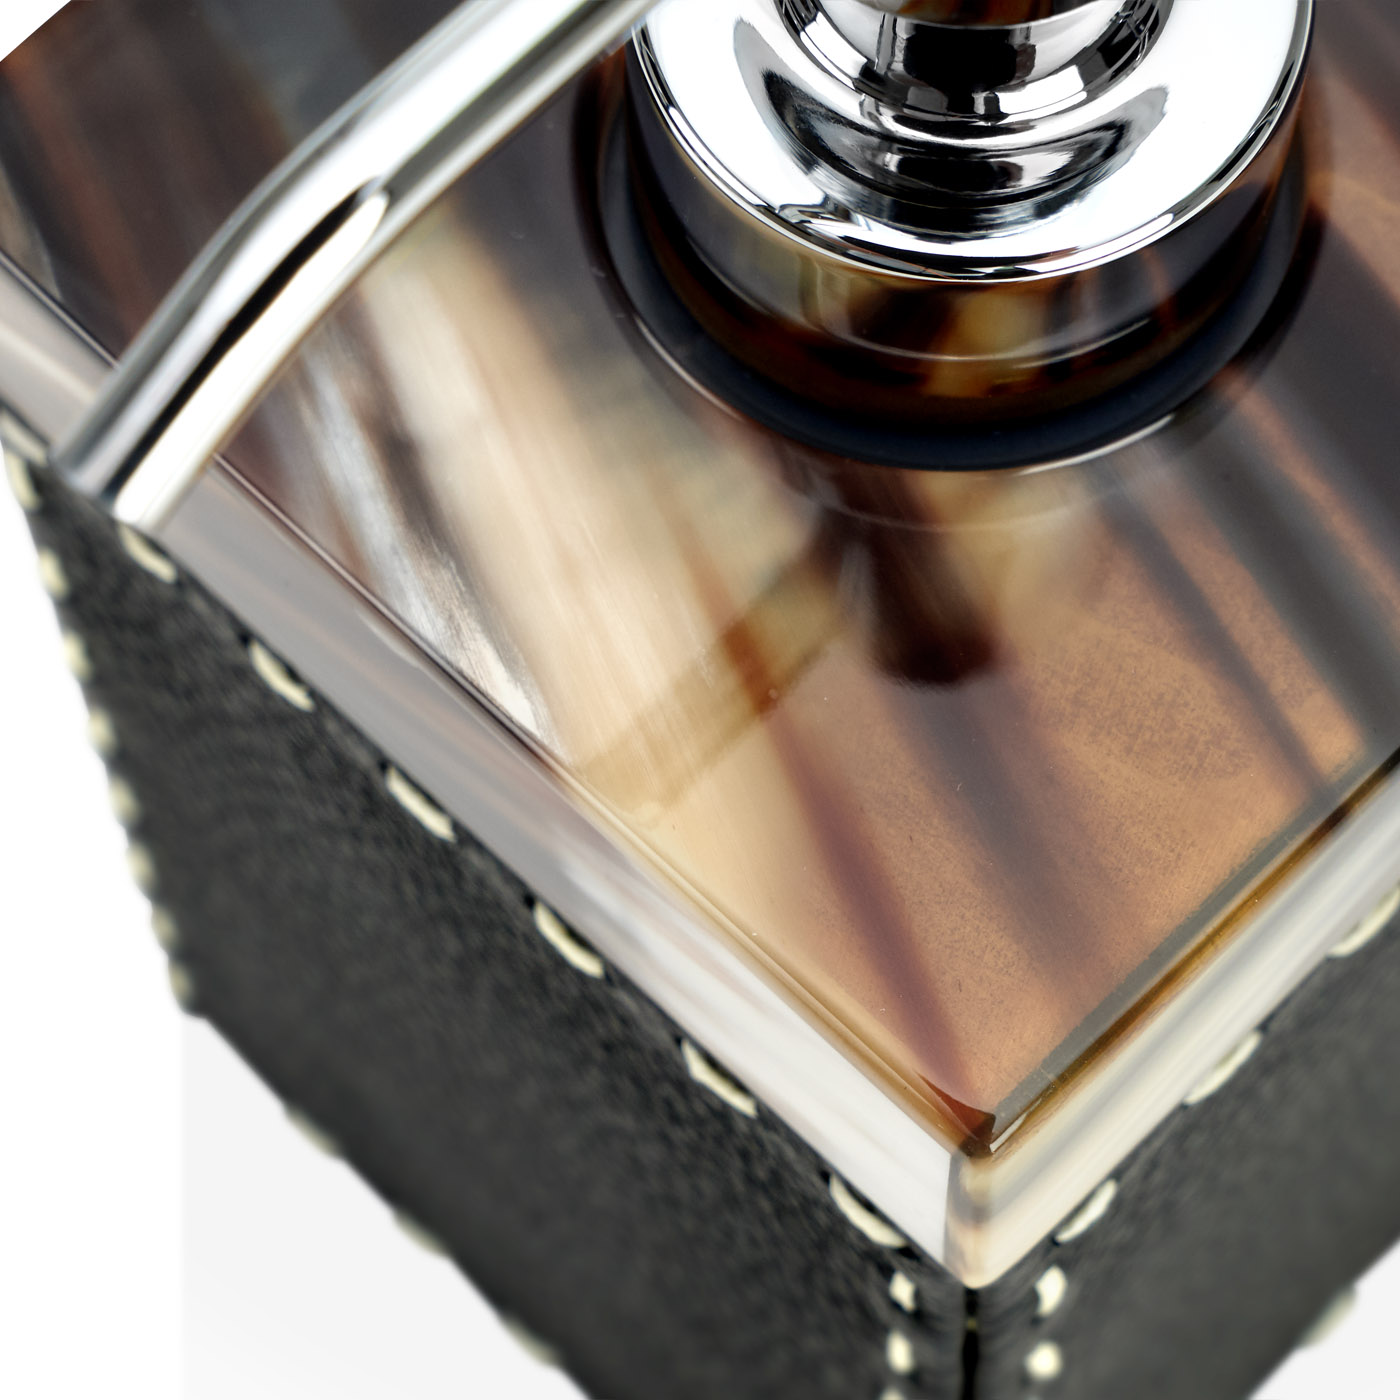 Bath accessories - Berenice soap dispenser in horn and Onyx colour leather 4495 - detail - Arcahorn